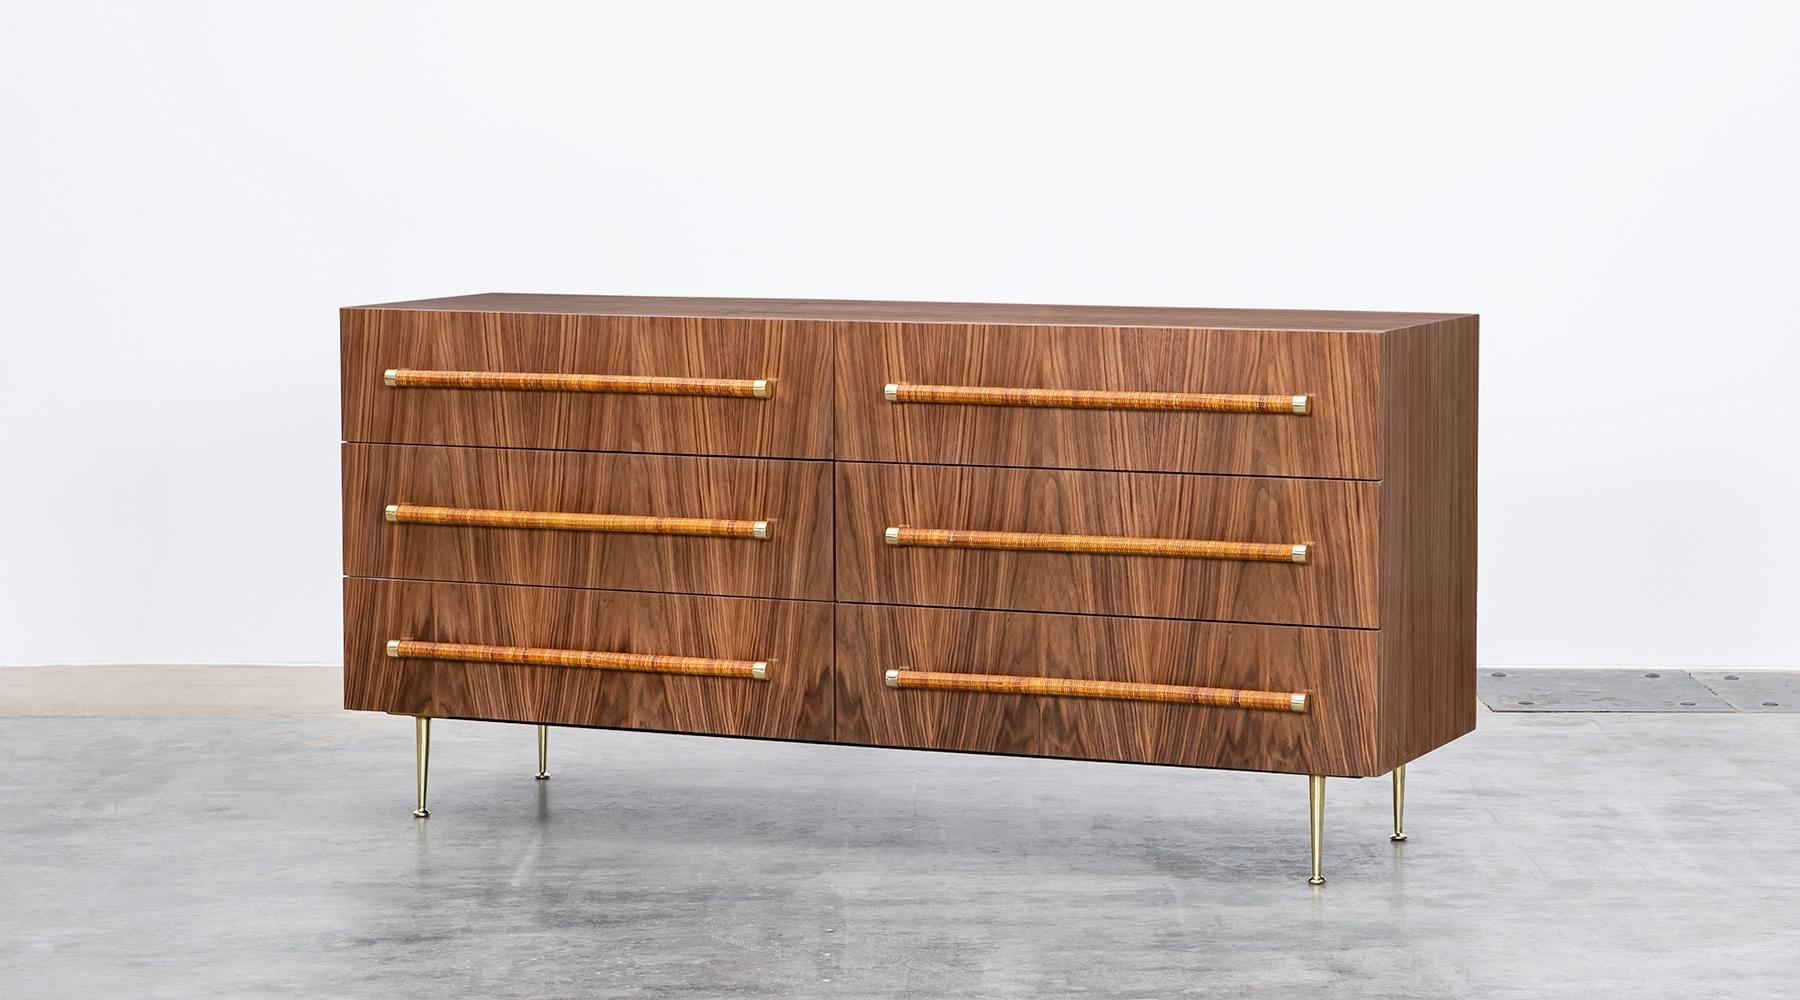 Sideboard in walnut, rattan and brass details by T.H. Robsjohn-Gibbings, USA, 1954. Newly lacquered and all parts restored in our workshop. 

Fantastically simple and beautiful T.H. Robsjohn-Gibbings sideboard. The marvelous walnut wood is matched